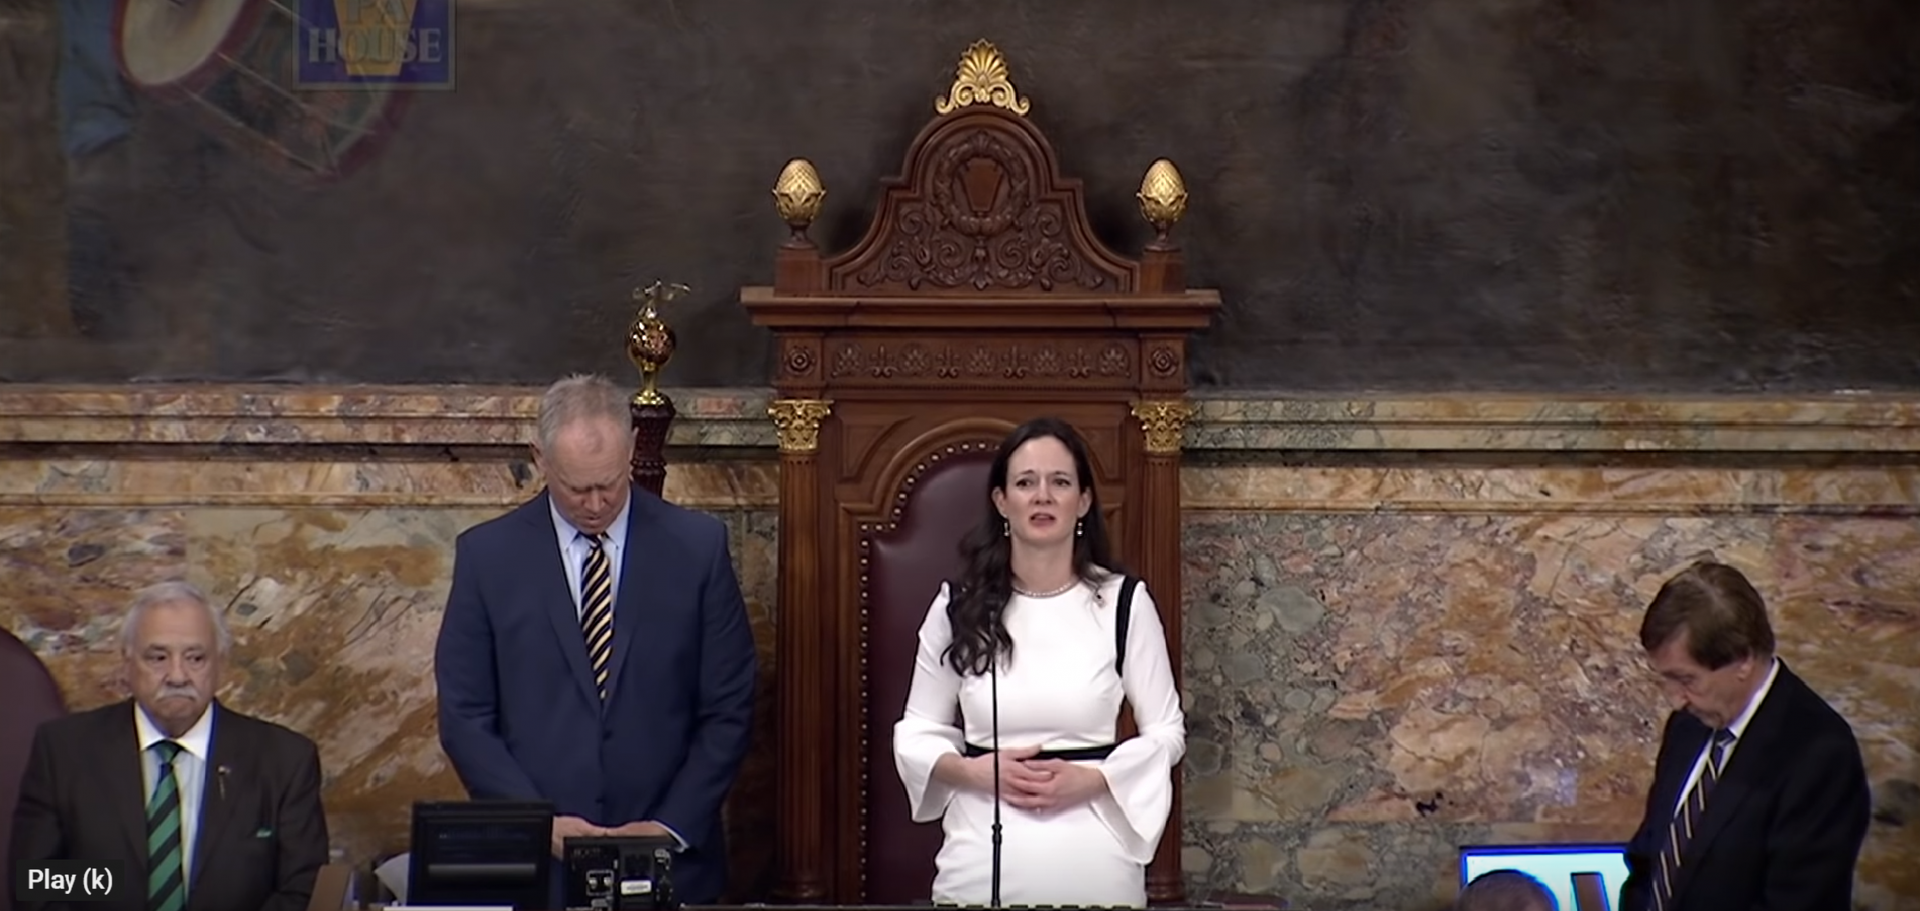 State Rep. Stephanie Borowicz delivers an invocation on March 25, 2019, in the state House.